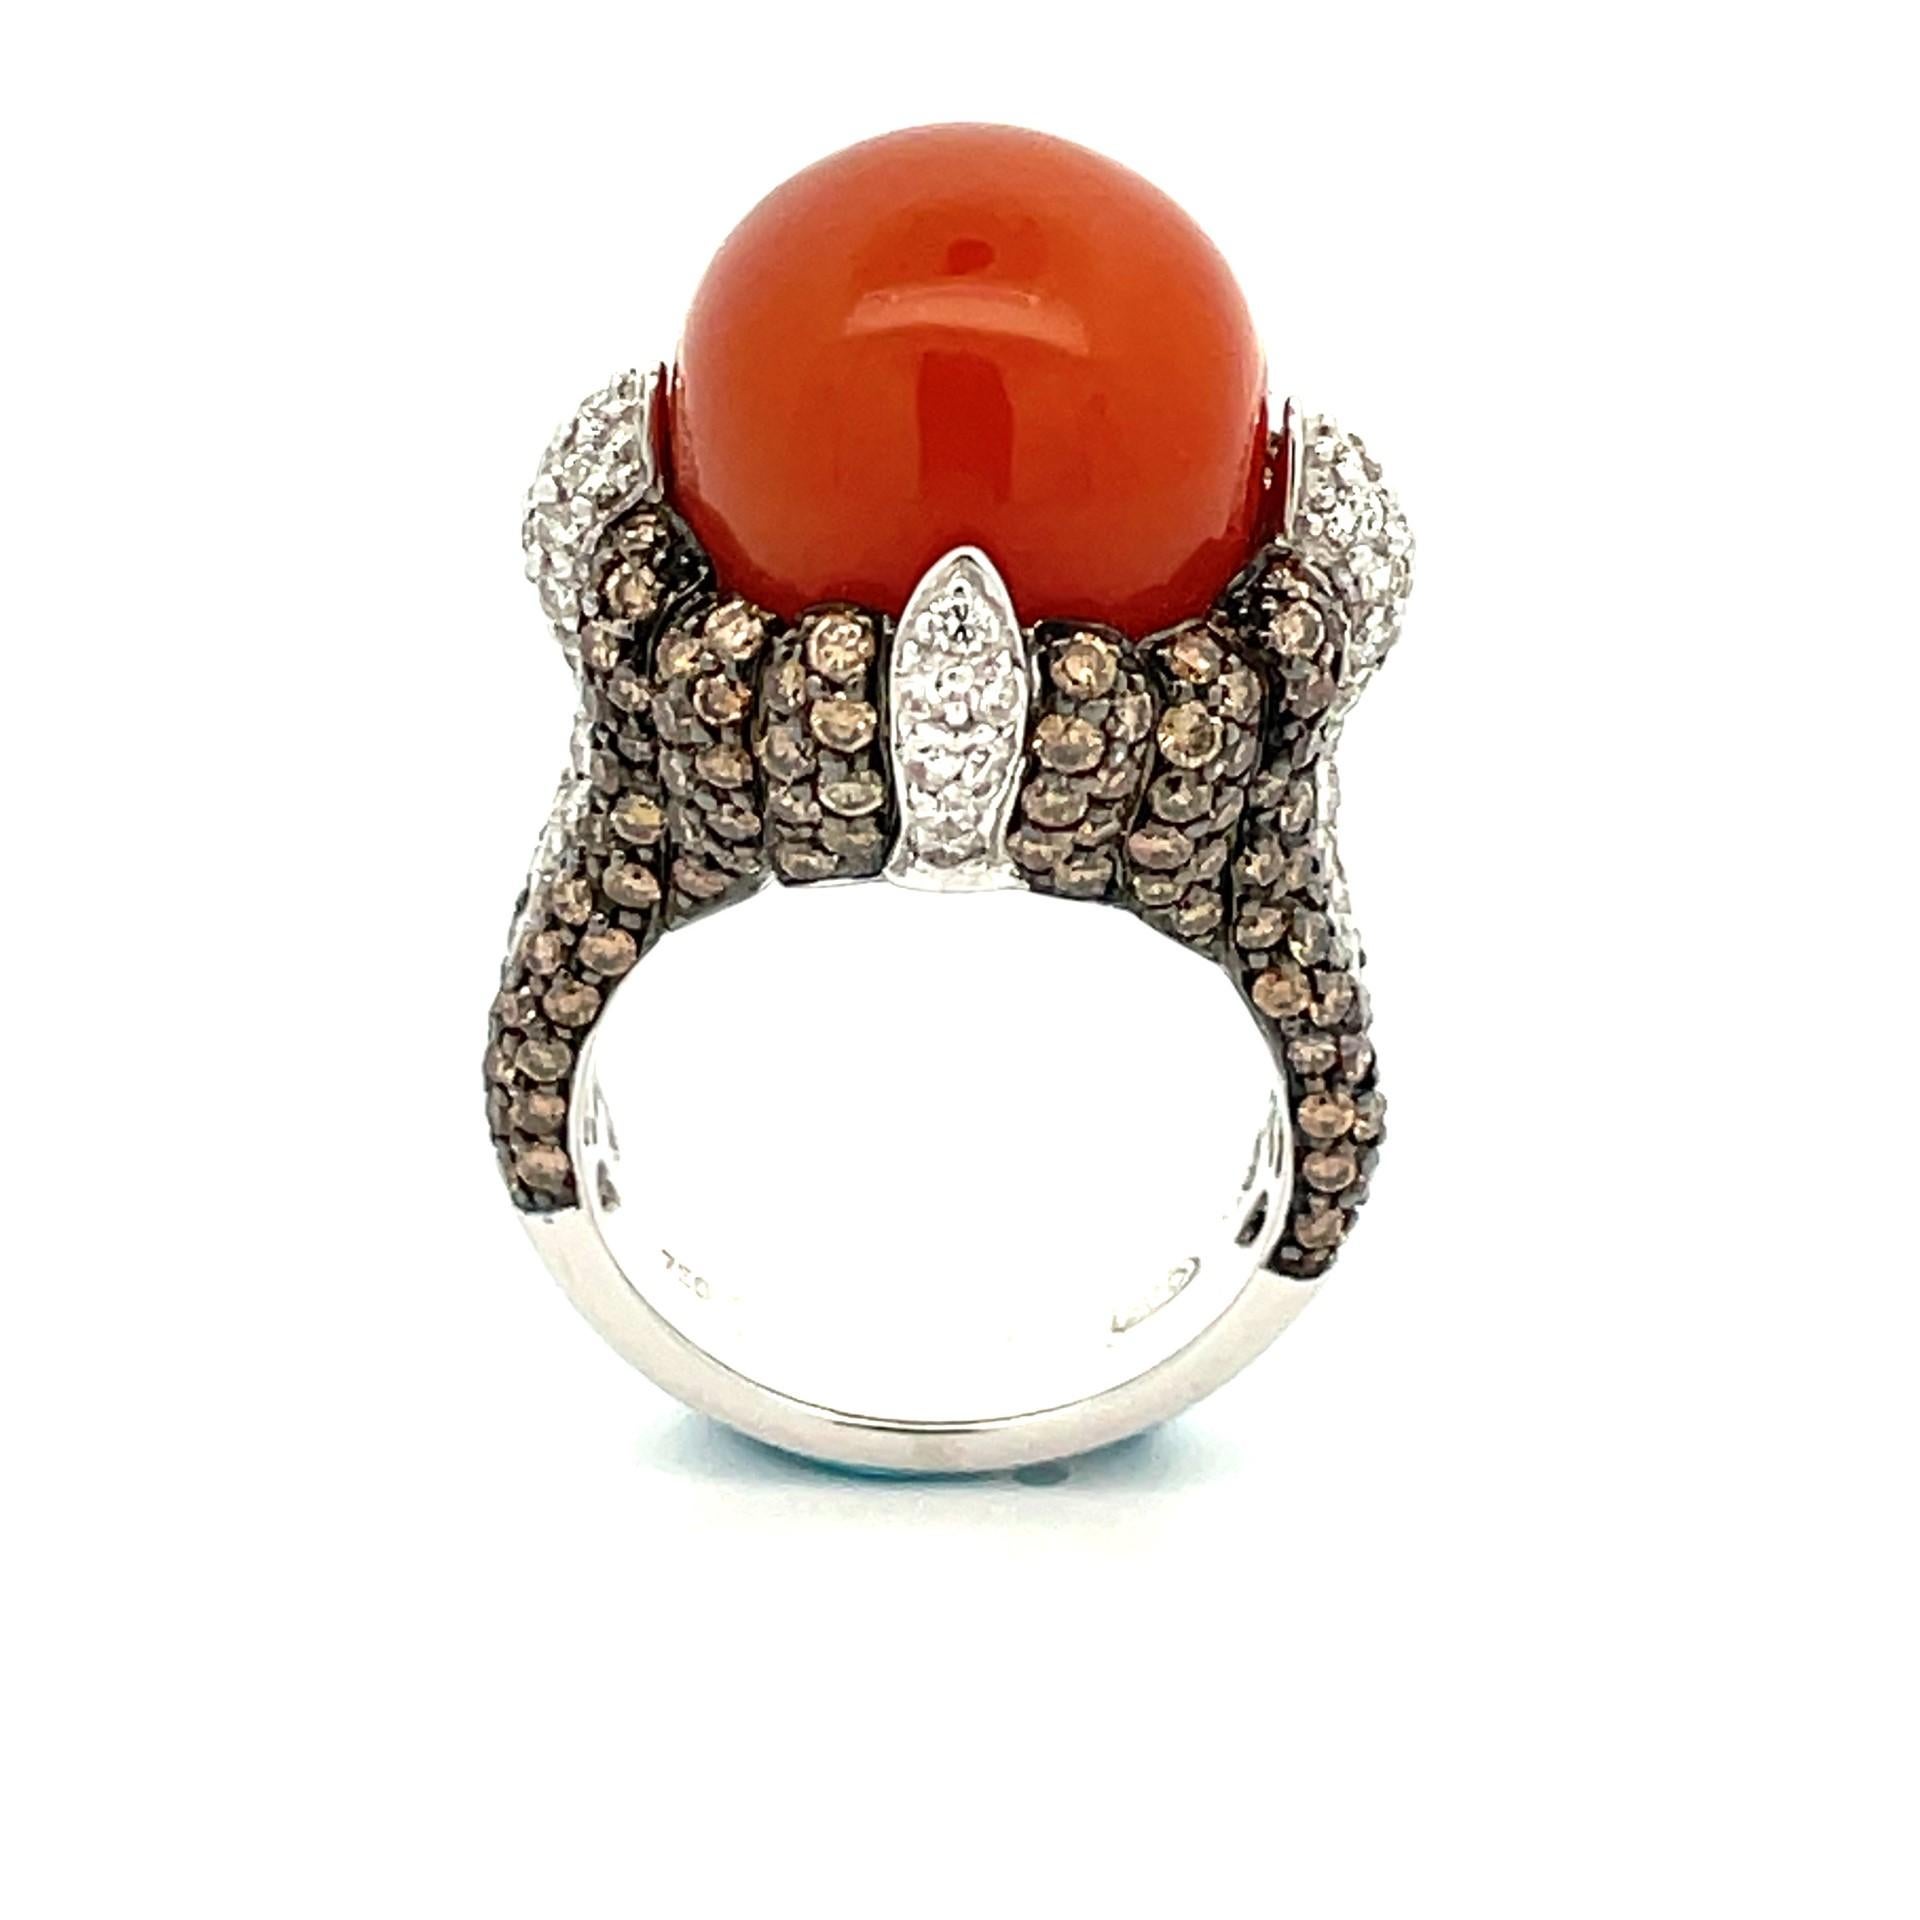 An impressive 18 karat white gold orange moonstone ring with natural white diamonds and black rhodium finish around natural brown diamonds , with a beautiful orange moonstons in the centre.

54 brilliant cut natural white diamonds .70ct total